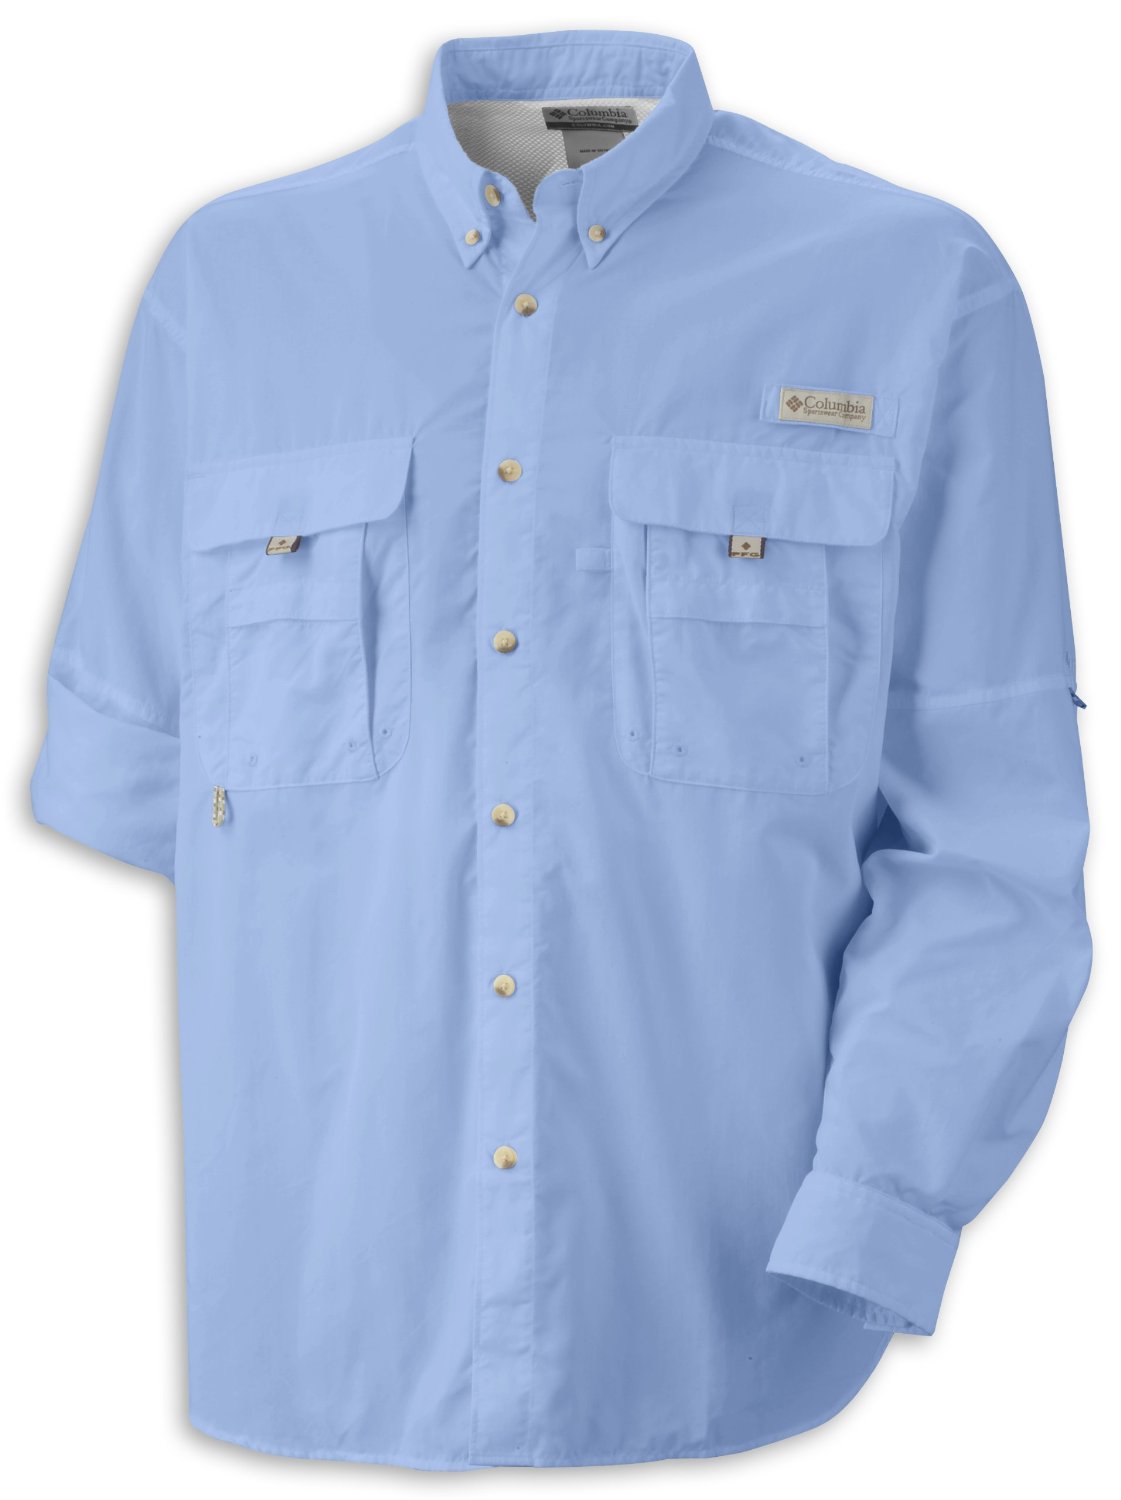 BEAT THE HEAT with a Quick Dry Fishing Shirt - Good Sam Camping Blog